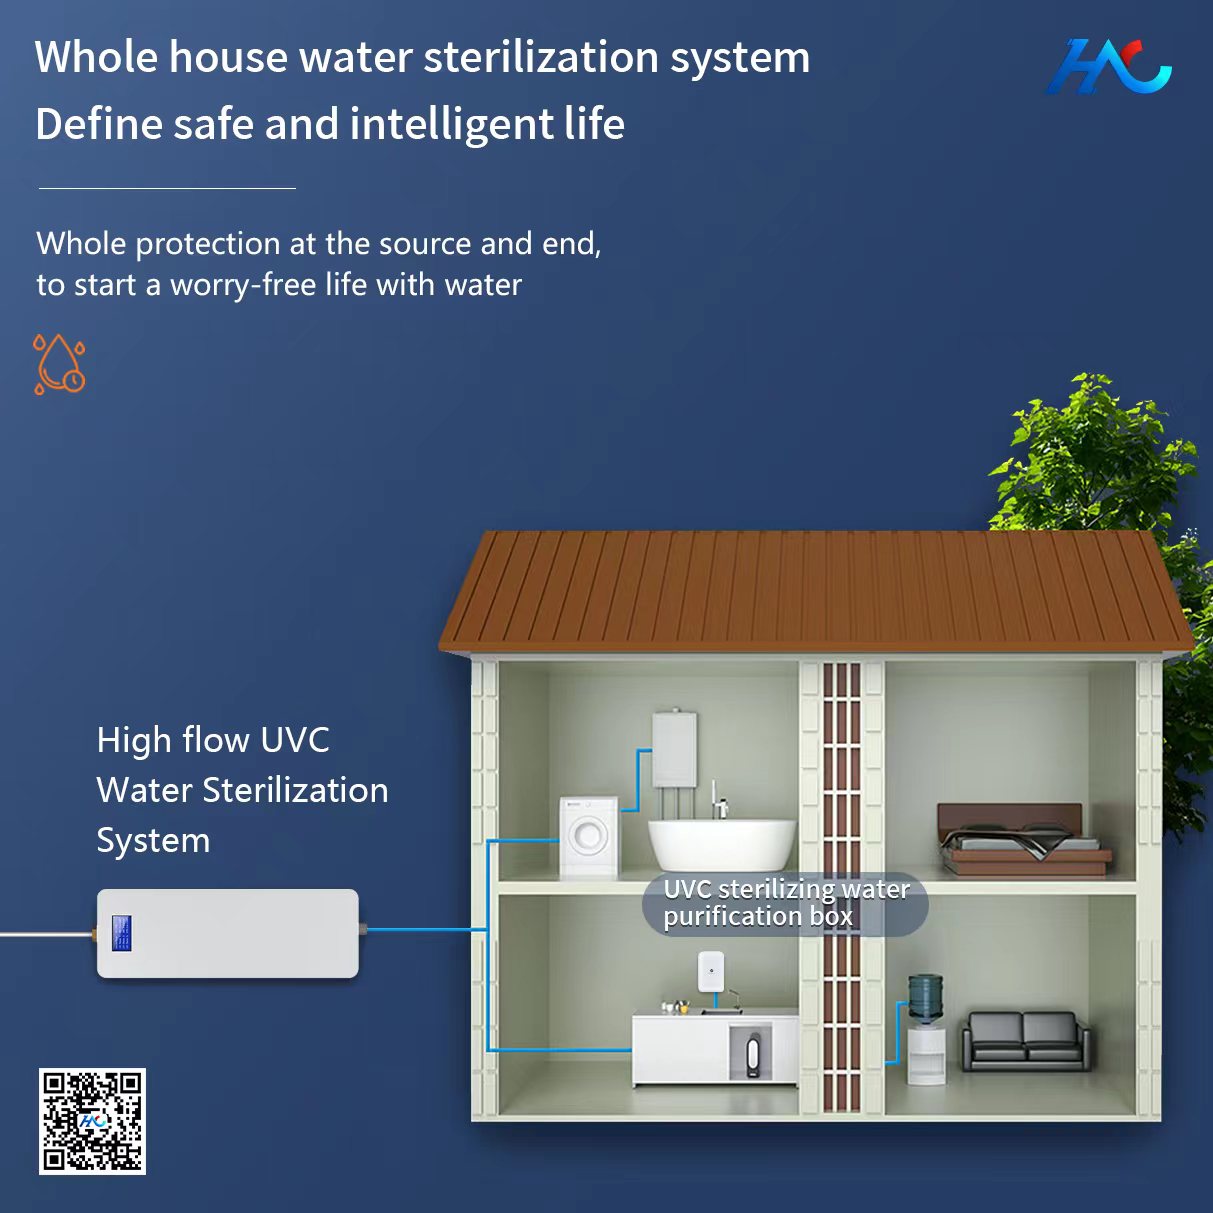 Protect your family and home from harmful bacteria and viruses with New launched Advanced UV water disinfection system that eliminates up to 99....